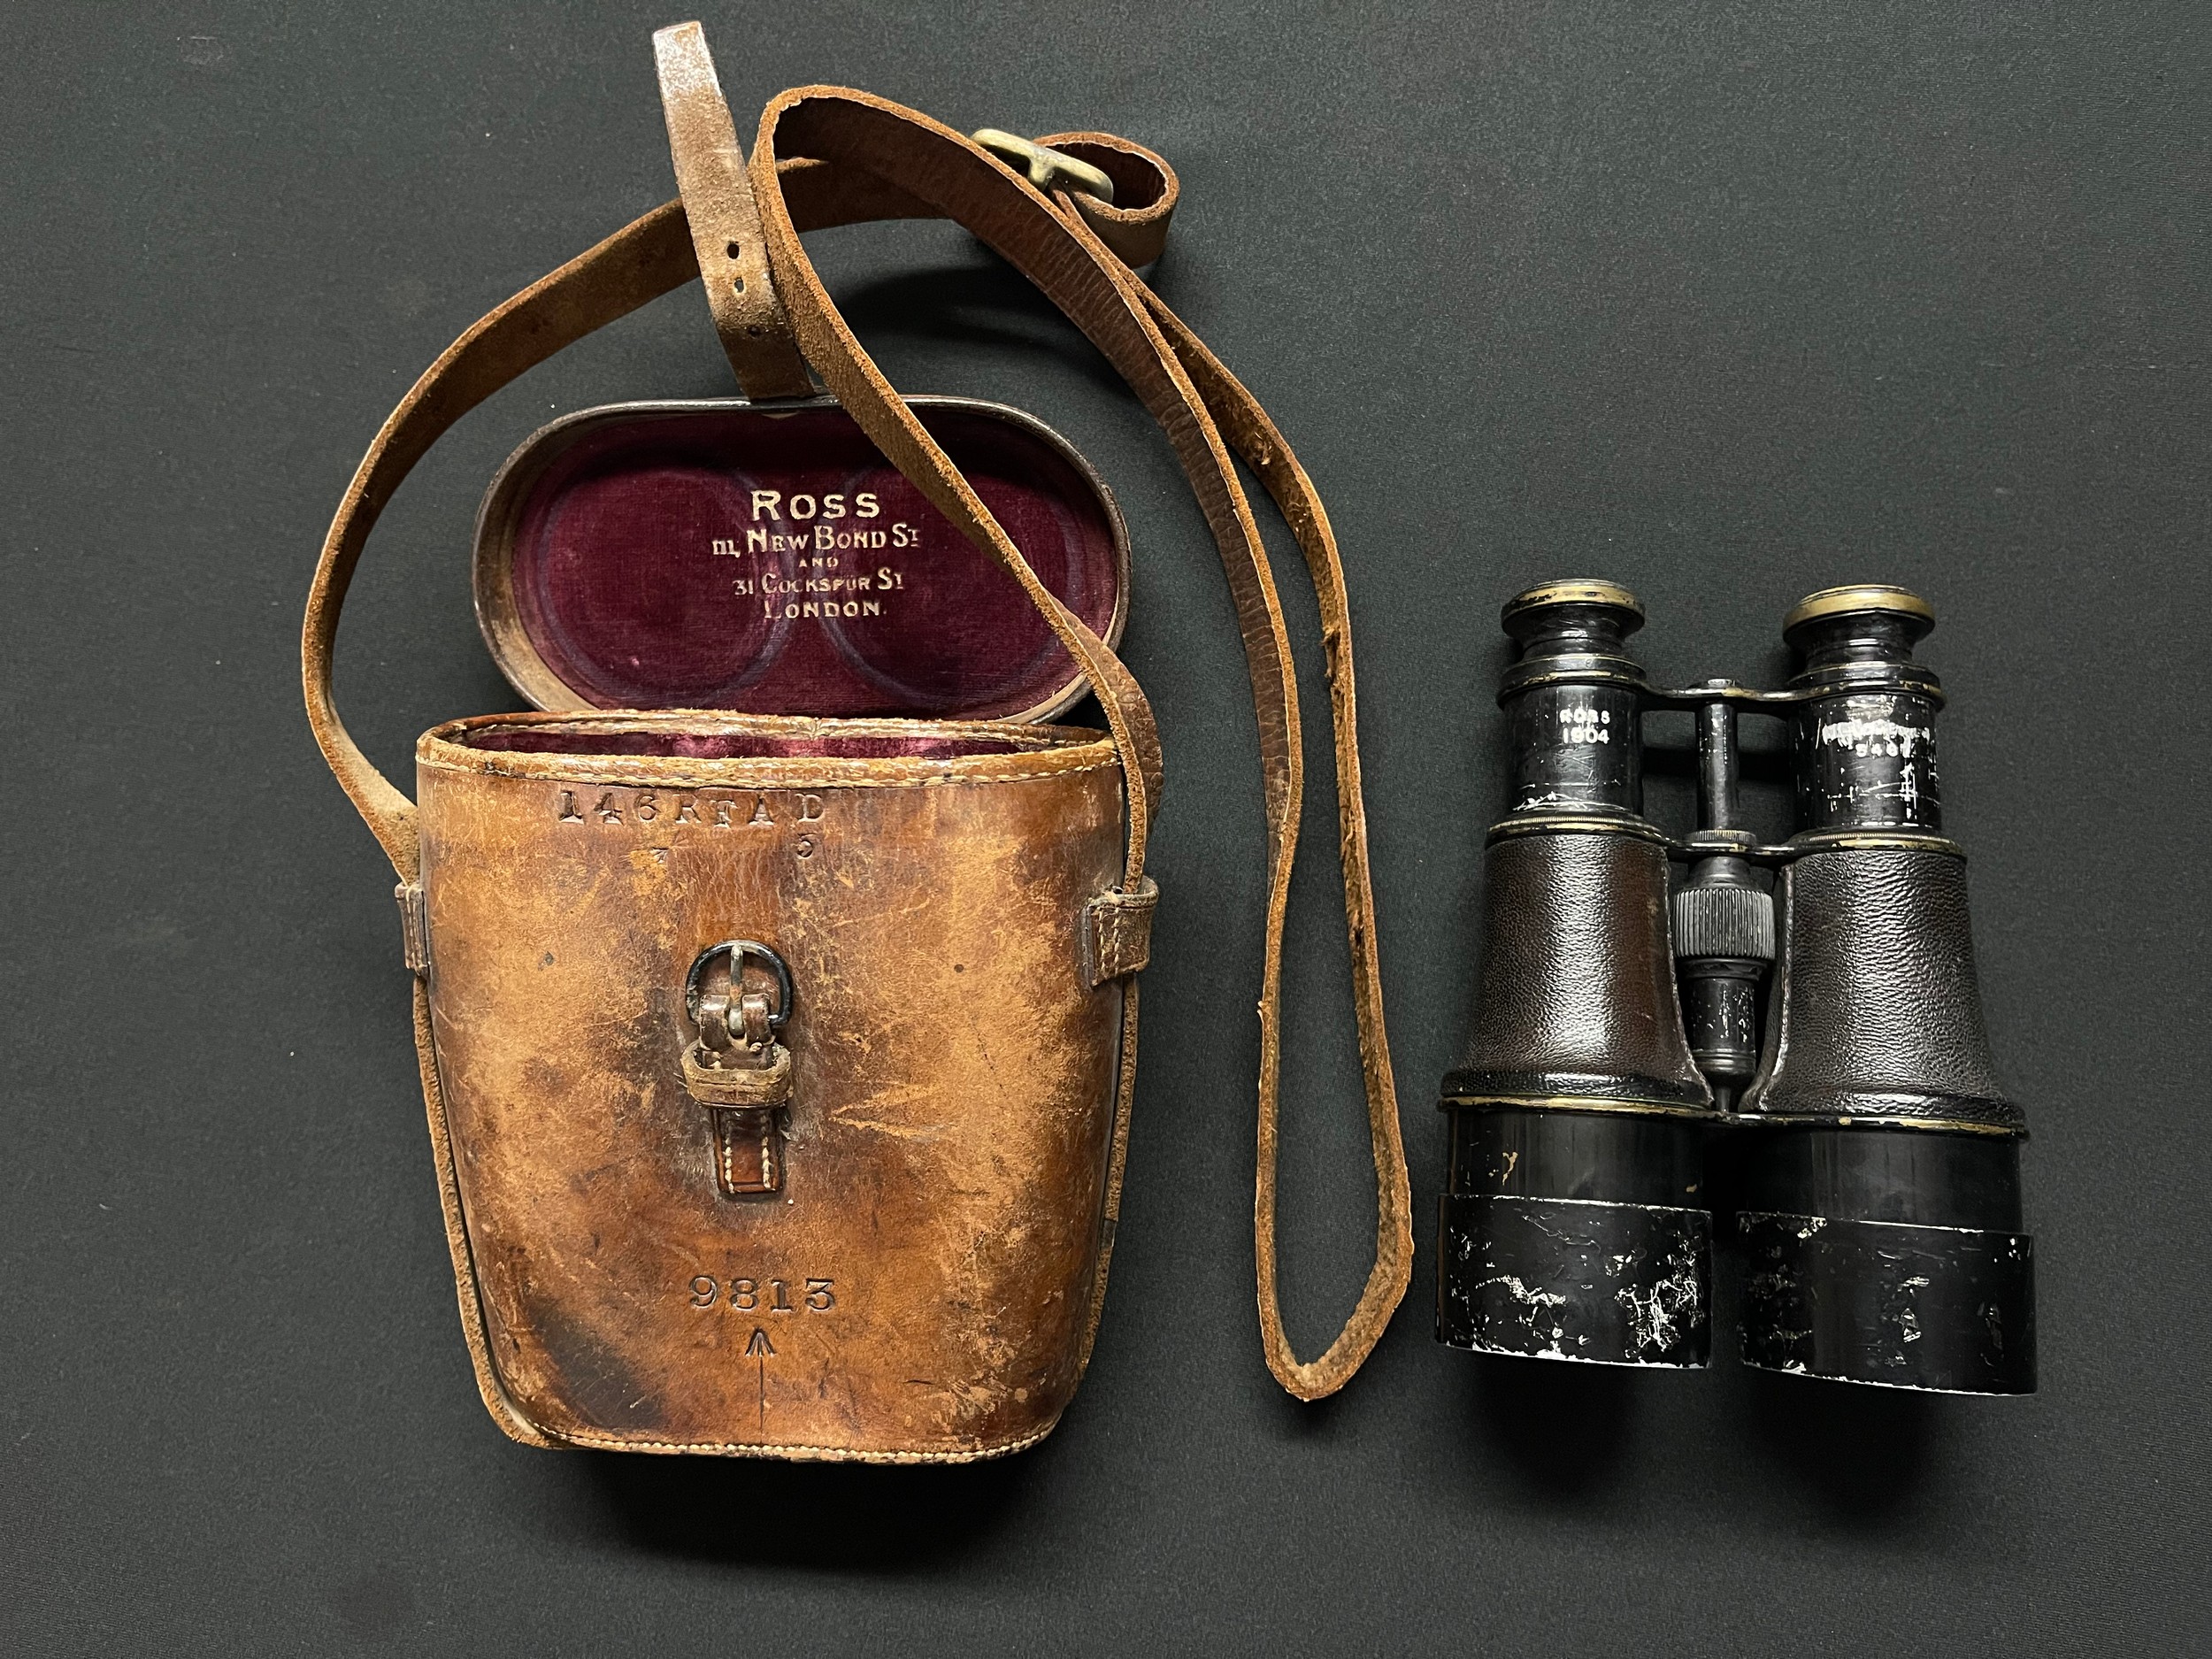 WW1 British binoculars by Ross of London 1904, Serial number 5467. Sun shades. Complete with leather